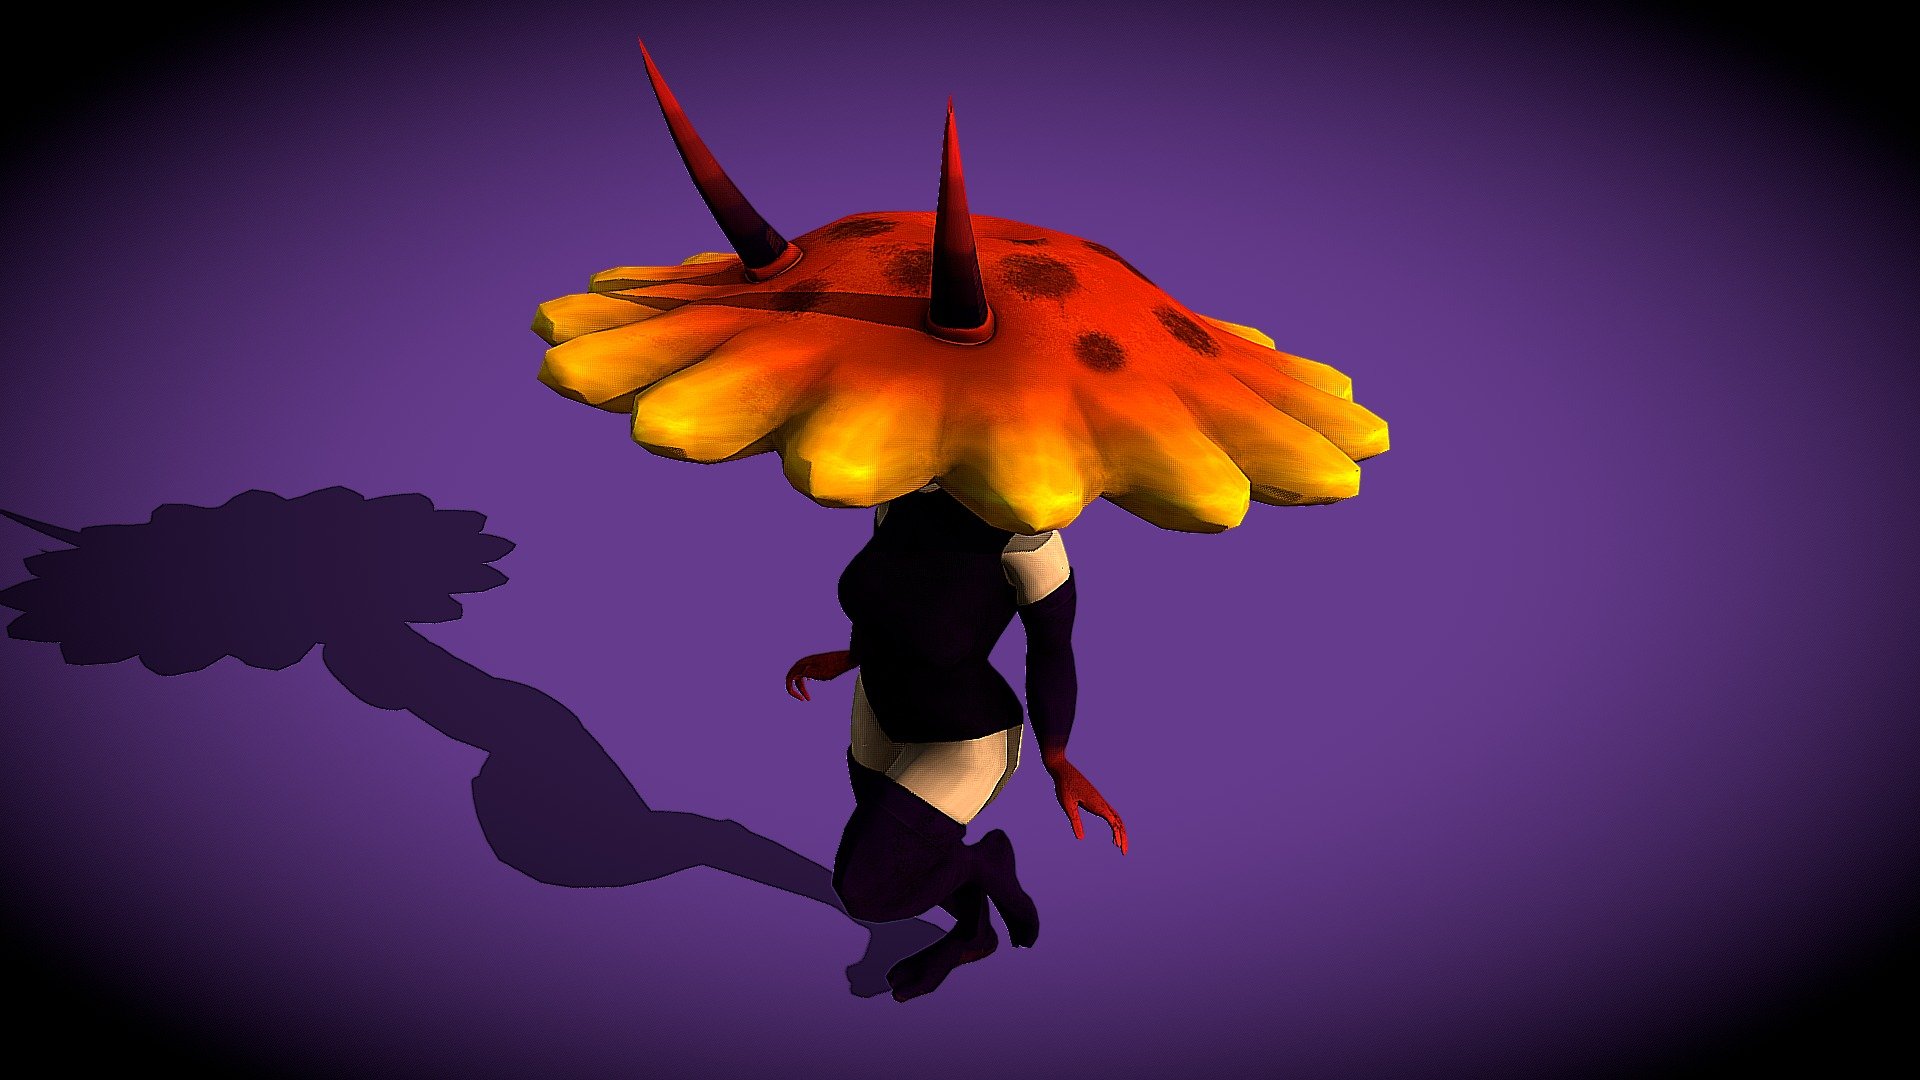 The Animation is from Mixamo, not mine. Just wanted to show that I can Retopologize for Animation Purposes. Don't have Strange Fungus growing inside your house on Halloween Night, or you may be visited by Amanita the Mushroom Succubus. Art Collaboration with Christina Wolodkowicz. Took one of her Inktobers and made it 3D. 
Base Mesh : https://sketchfab.com/models/4aa9e4f1f25246b0b460d443b171defa#Female by JoseDiaz is licensed under CC Attribution. 
Original Art: https://www.artstation.com/artwork/oe4Vq - Mushroom Succubus - 3D model by Mark Wilson (@markkrawiec) 3d model